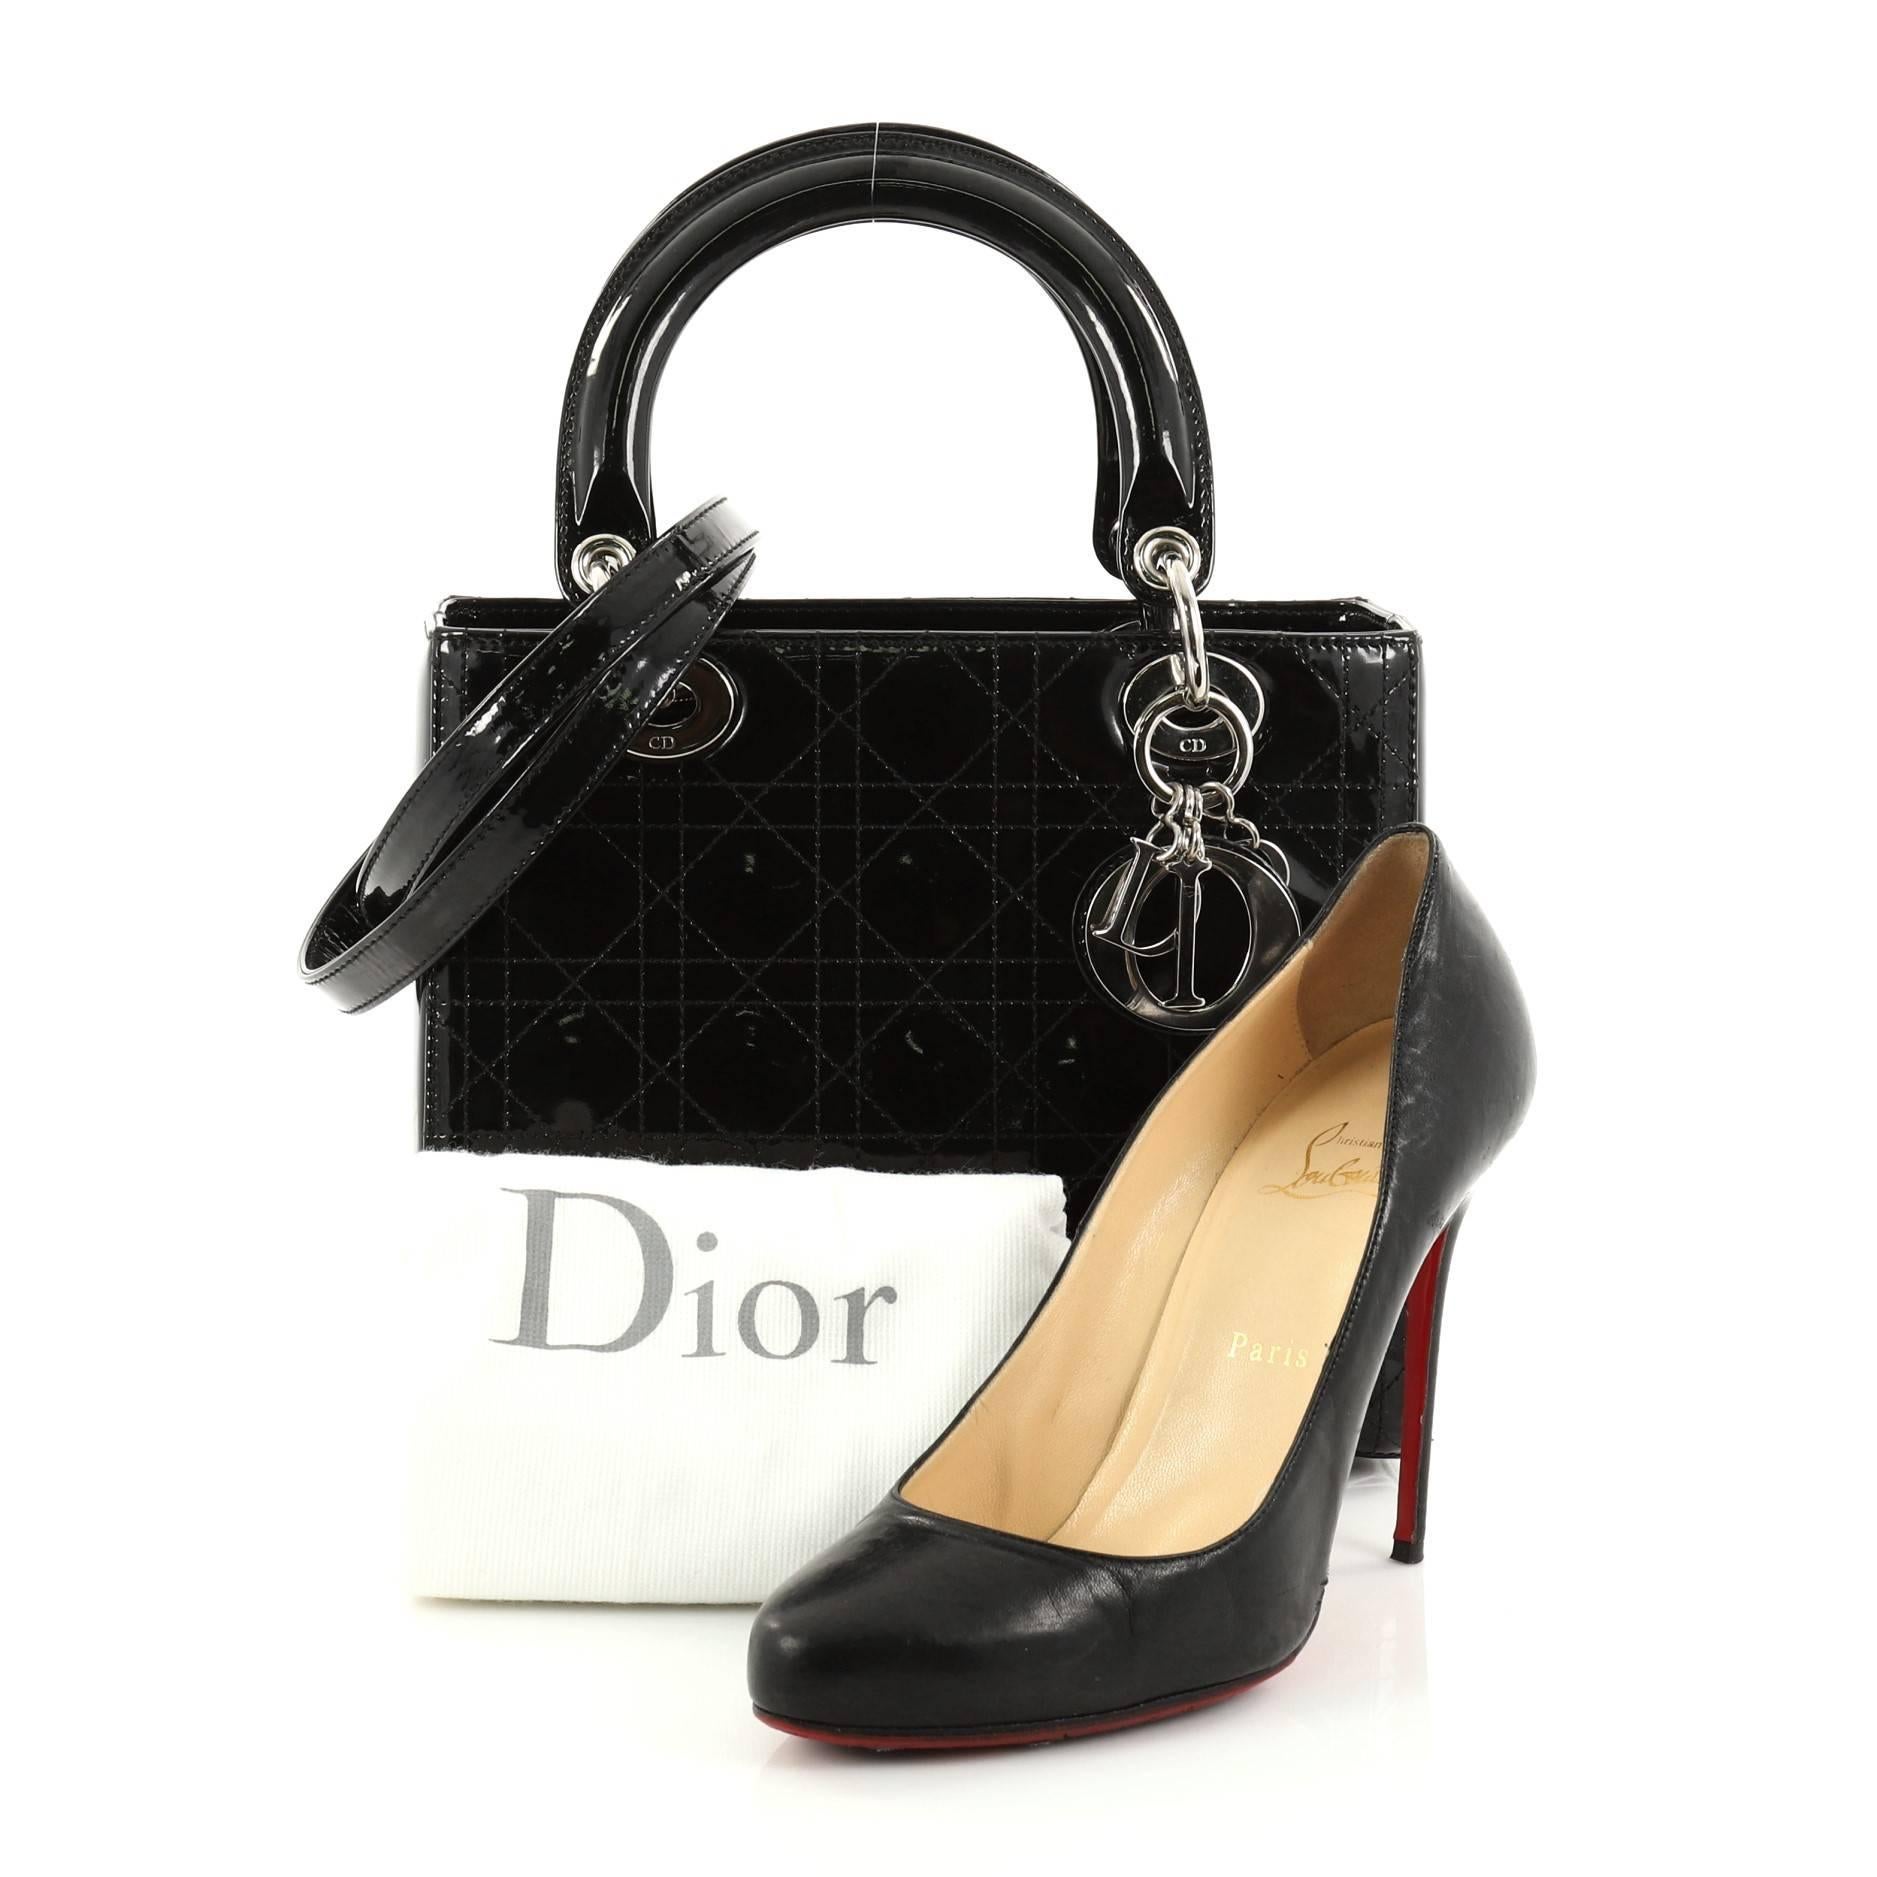 This authentic Christian Dior Lady Dior Handbag Stitched Cannage Patent Medium is an elegant classic bag that every fashionista needs in her wardrobe. Crafted from black patent leather in Dior's iconic cannage stitching, this boxy bag features short